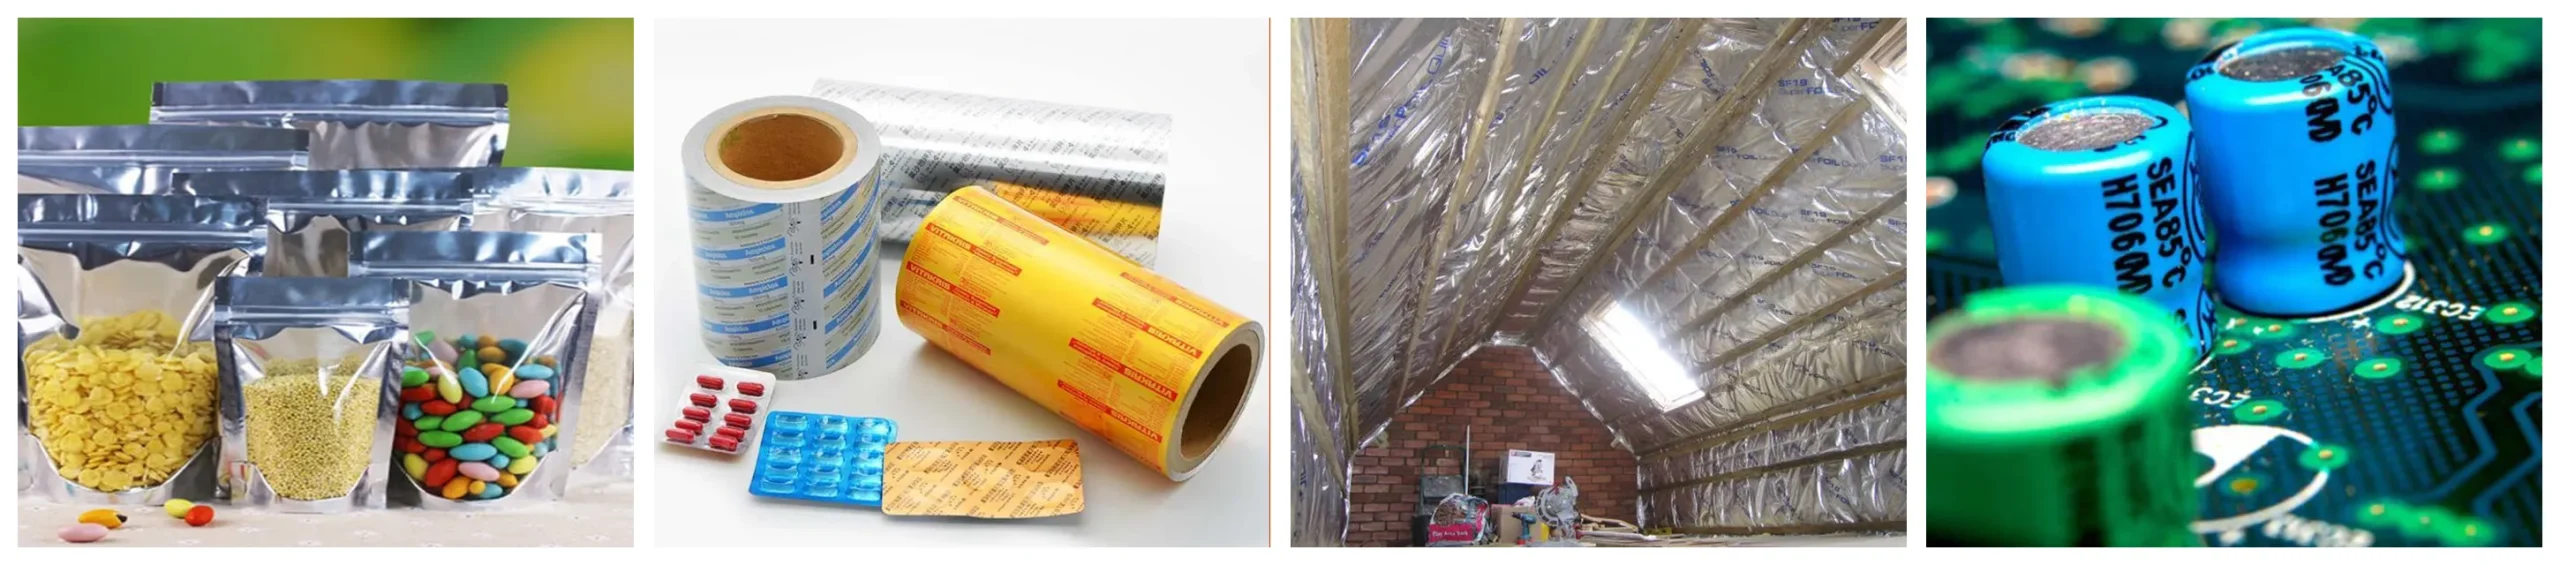 1060 aluminum foil for food and beverage containers, packaging drugs, insulation in roofs, walls, and HVAC systems